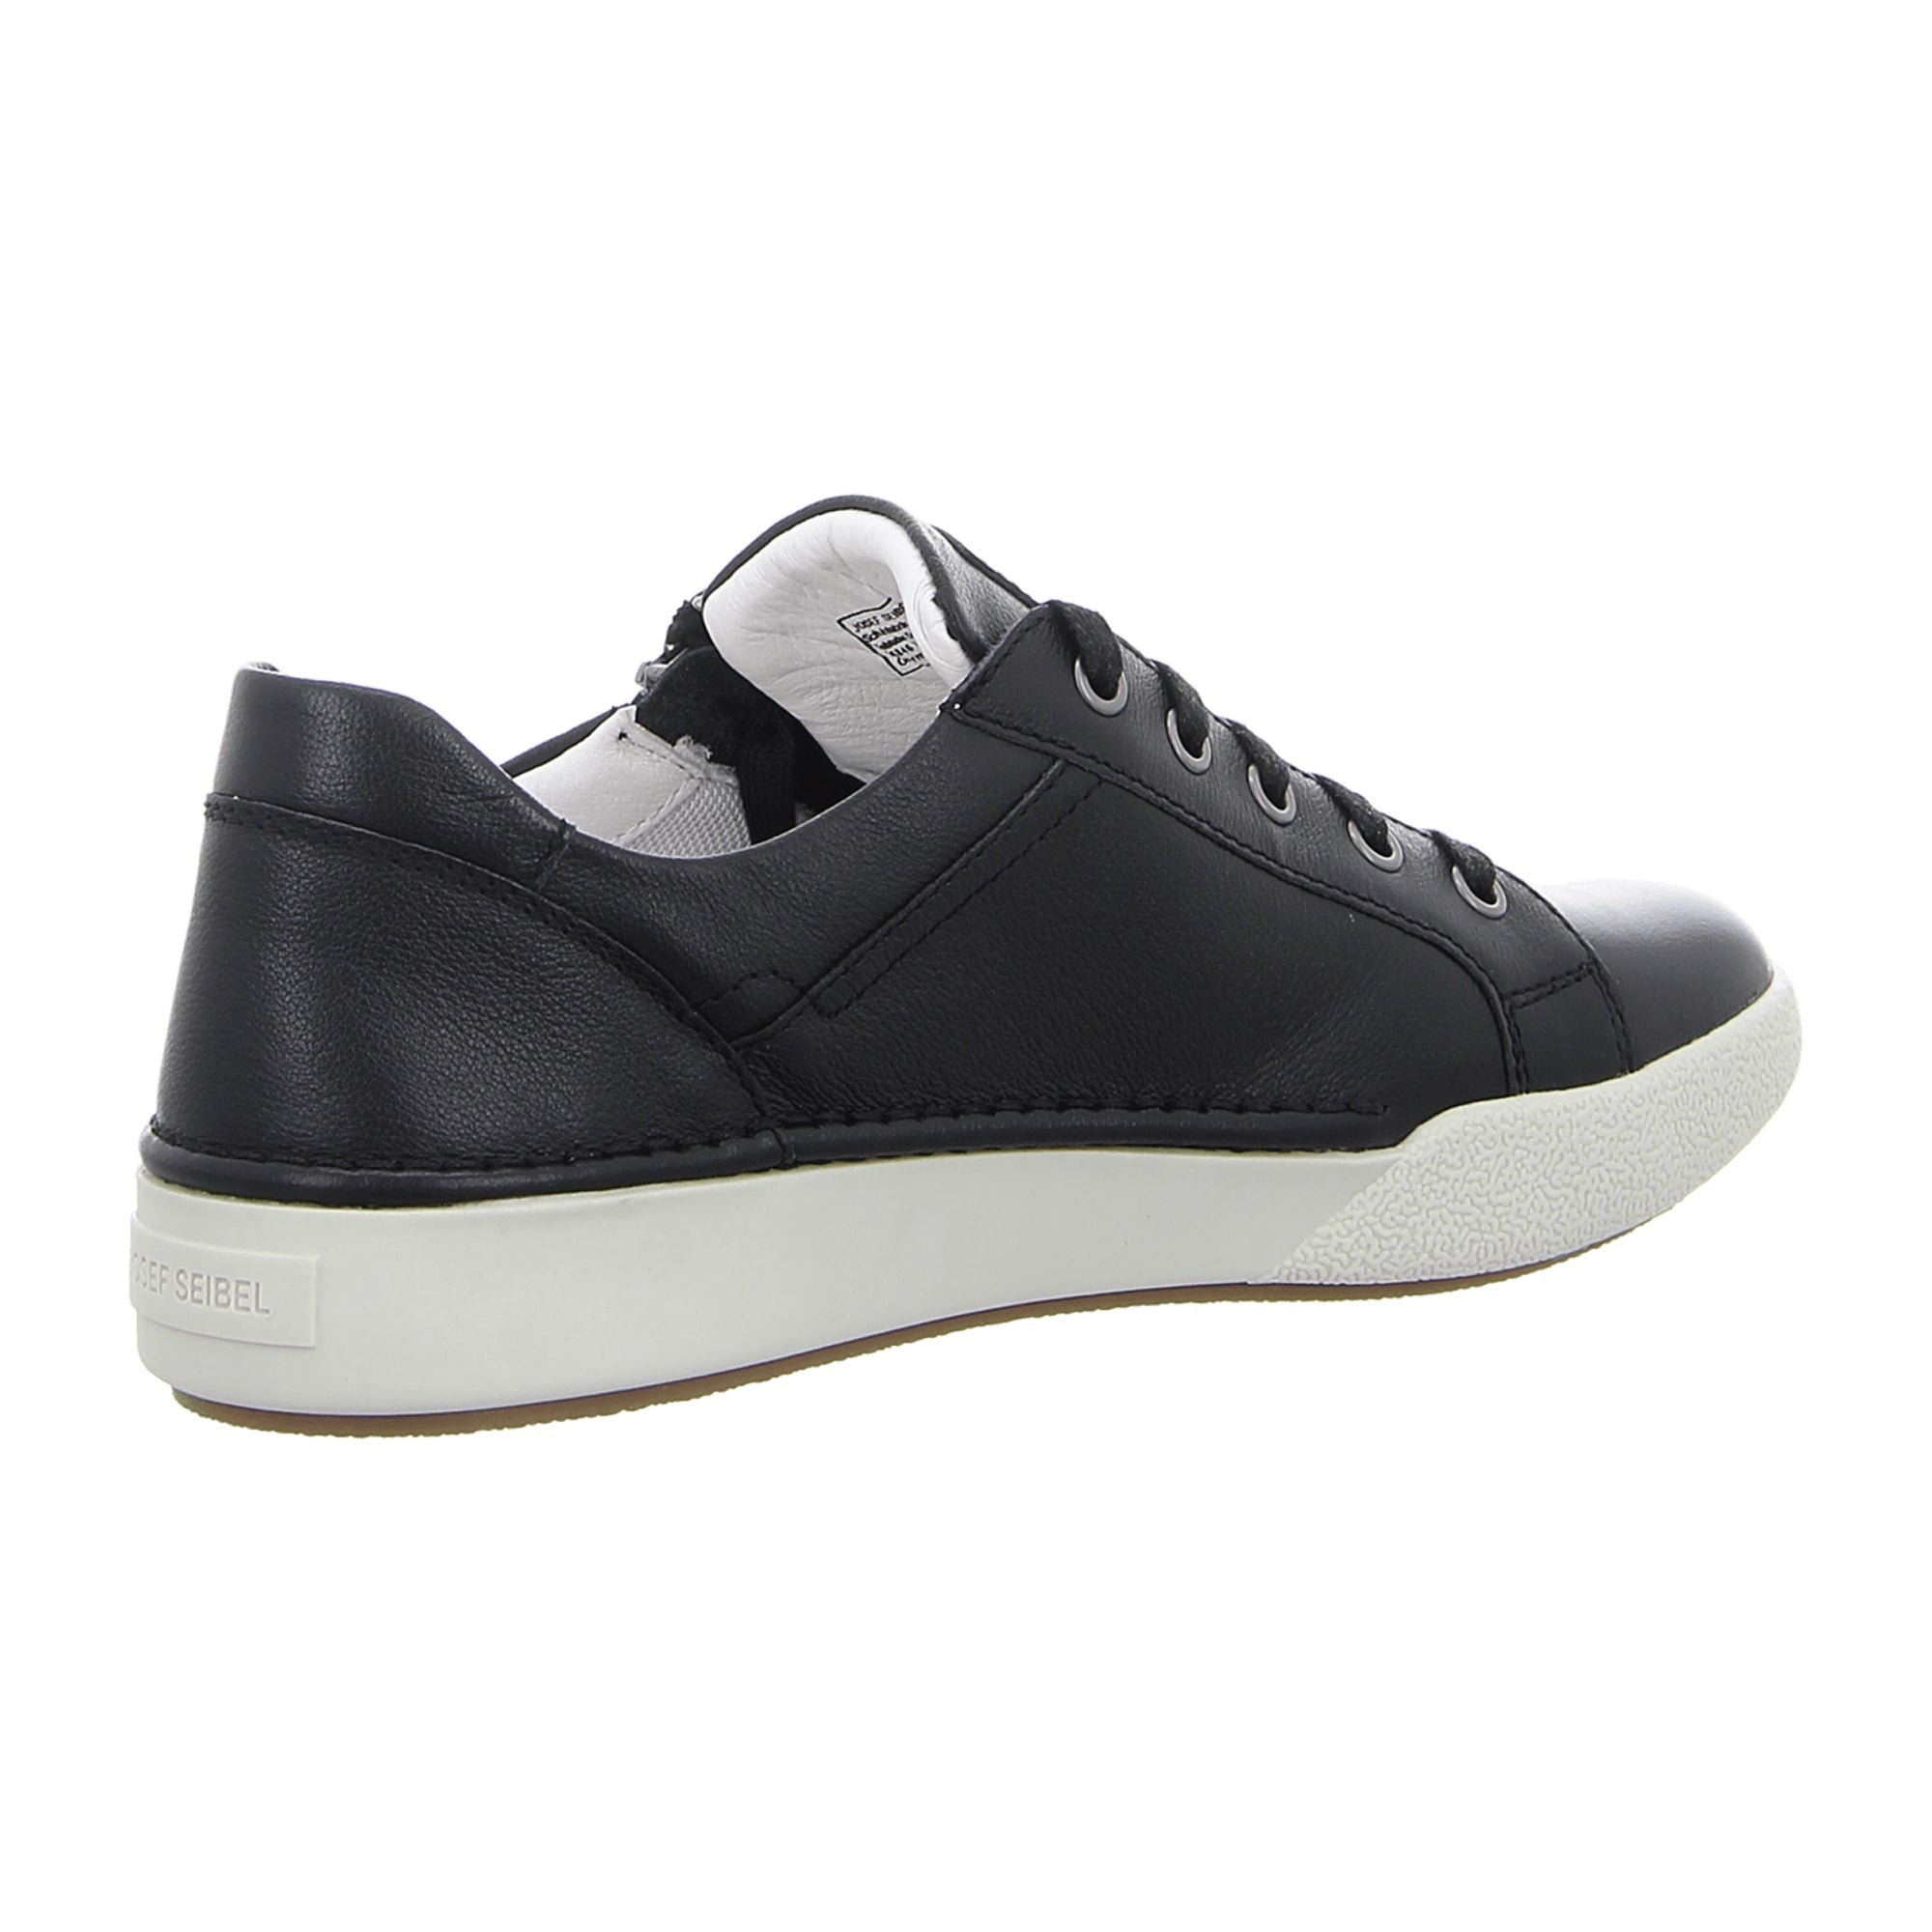 Comfortable Lace-up Shoes for Women in Black by Josef Seibel